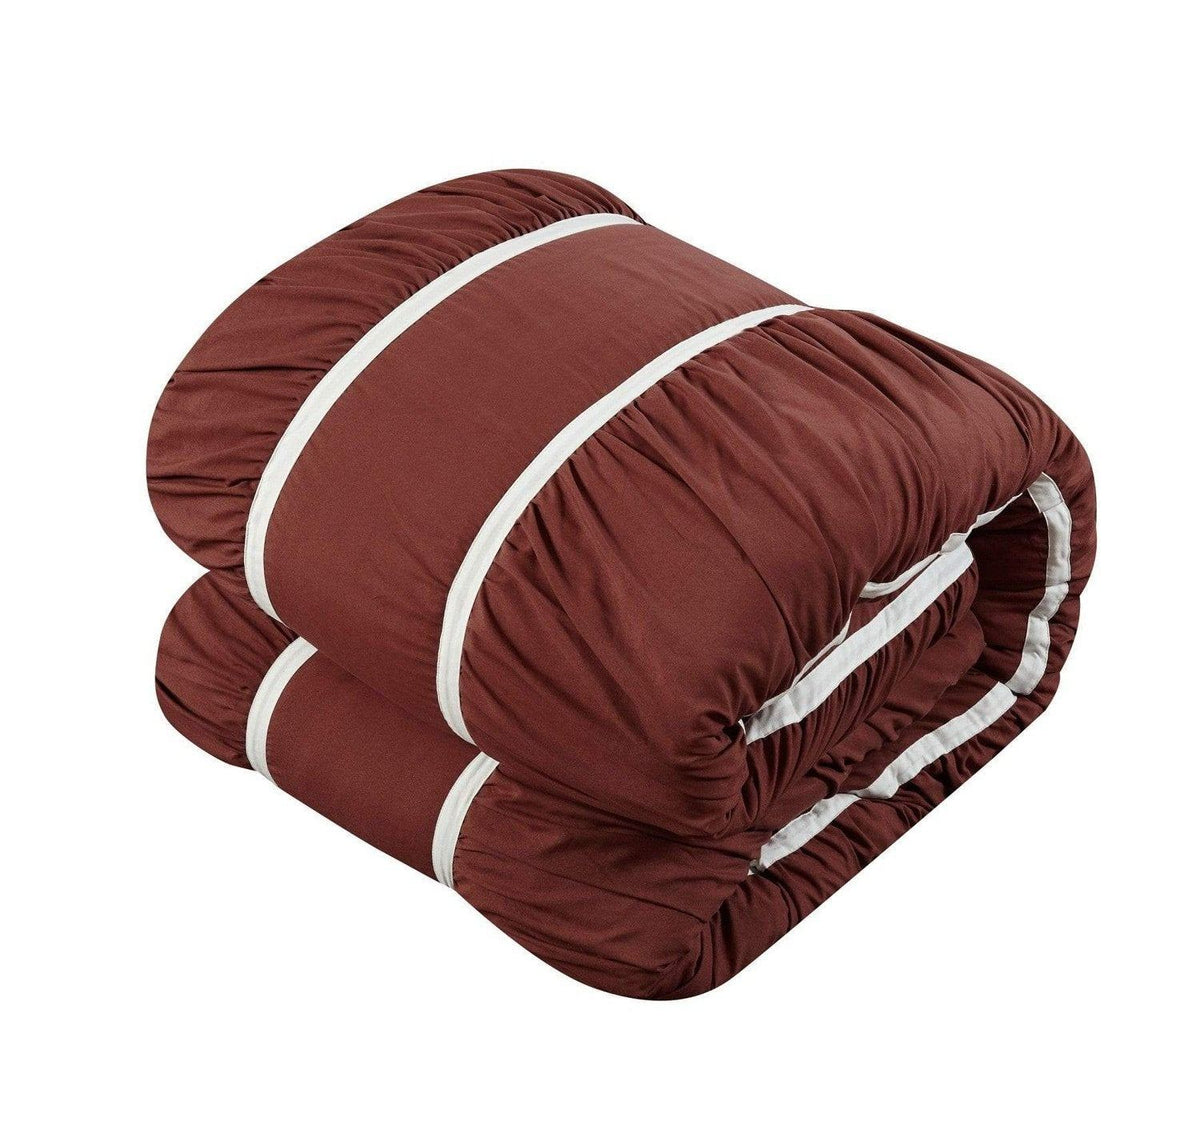 10-Piece Aero Pleated & Ruffled Bed in a Bag Comforter and Sheet